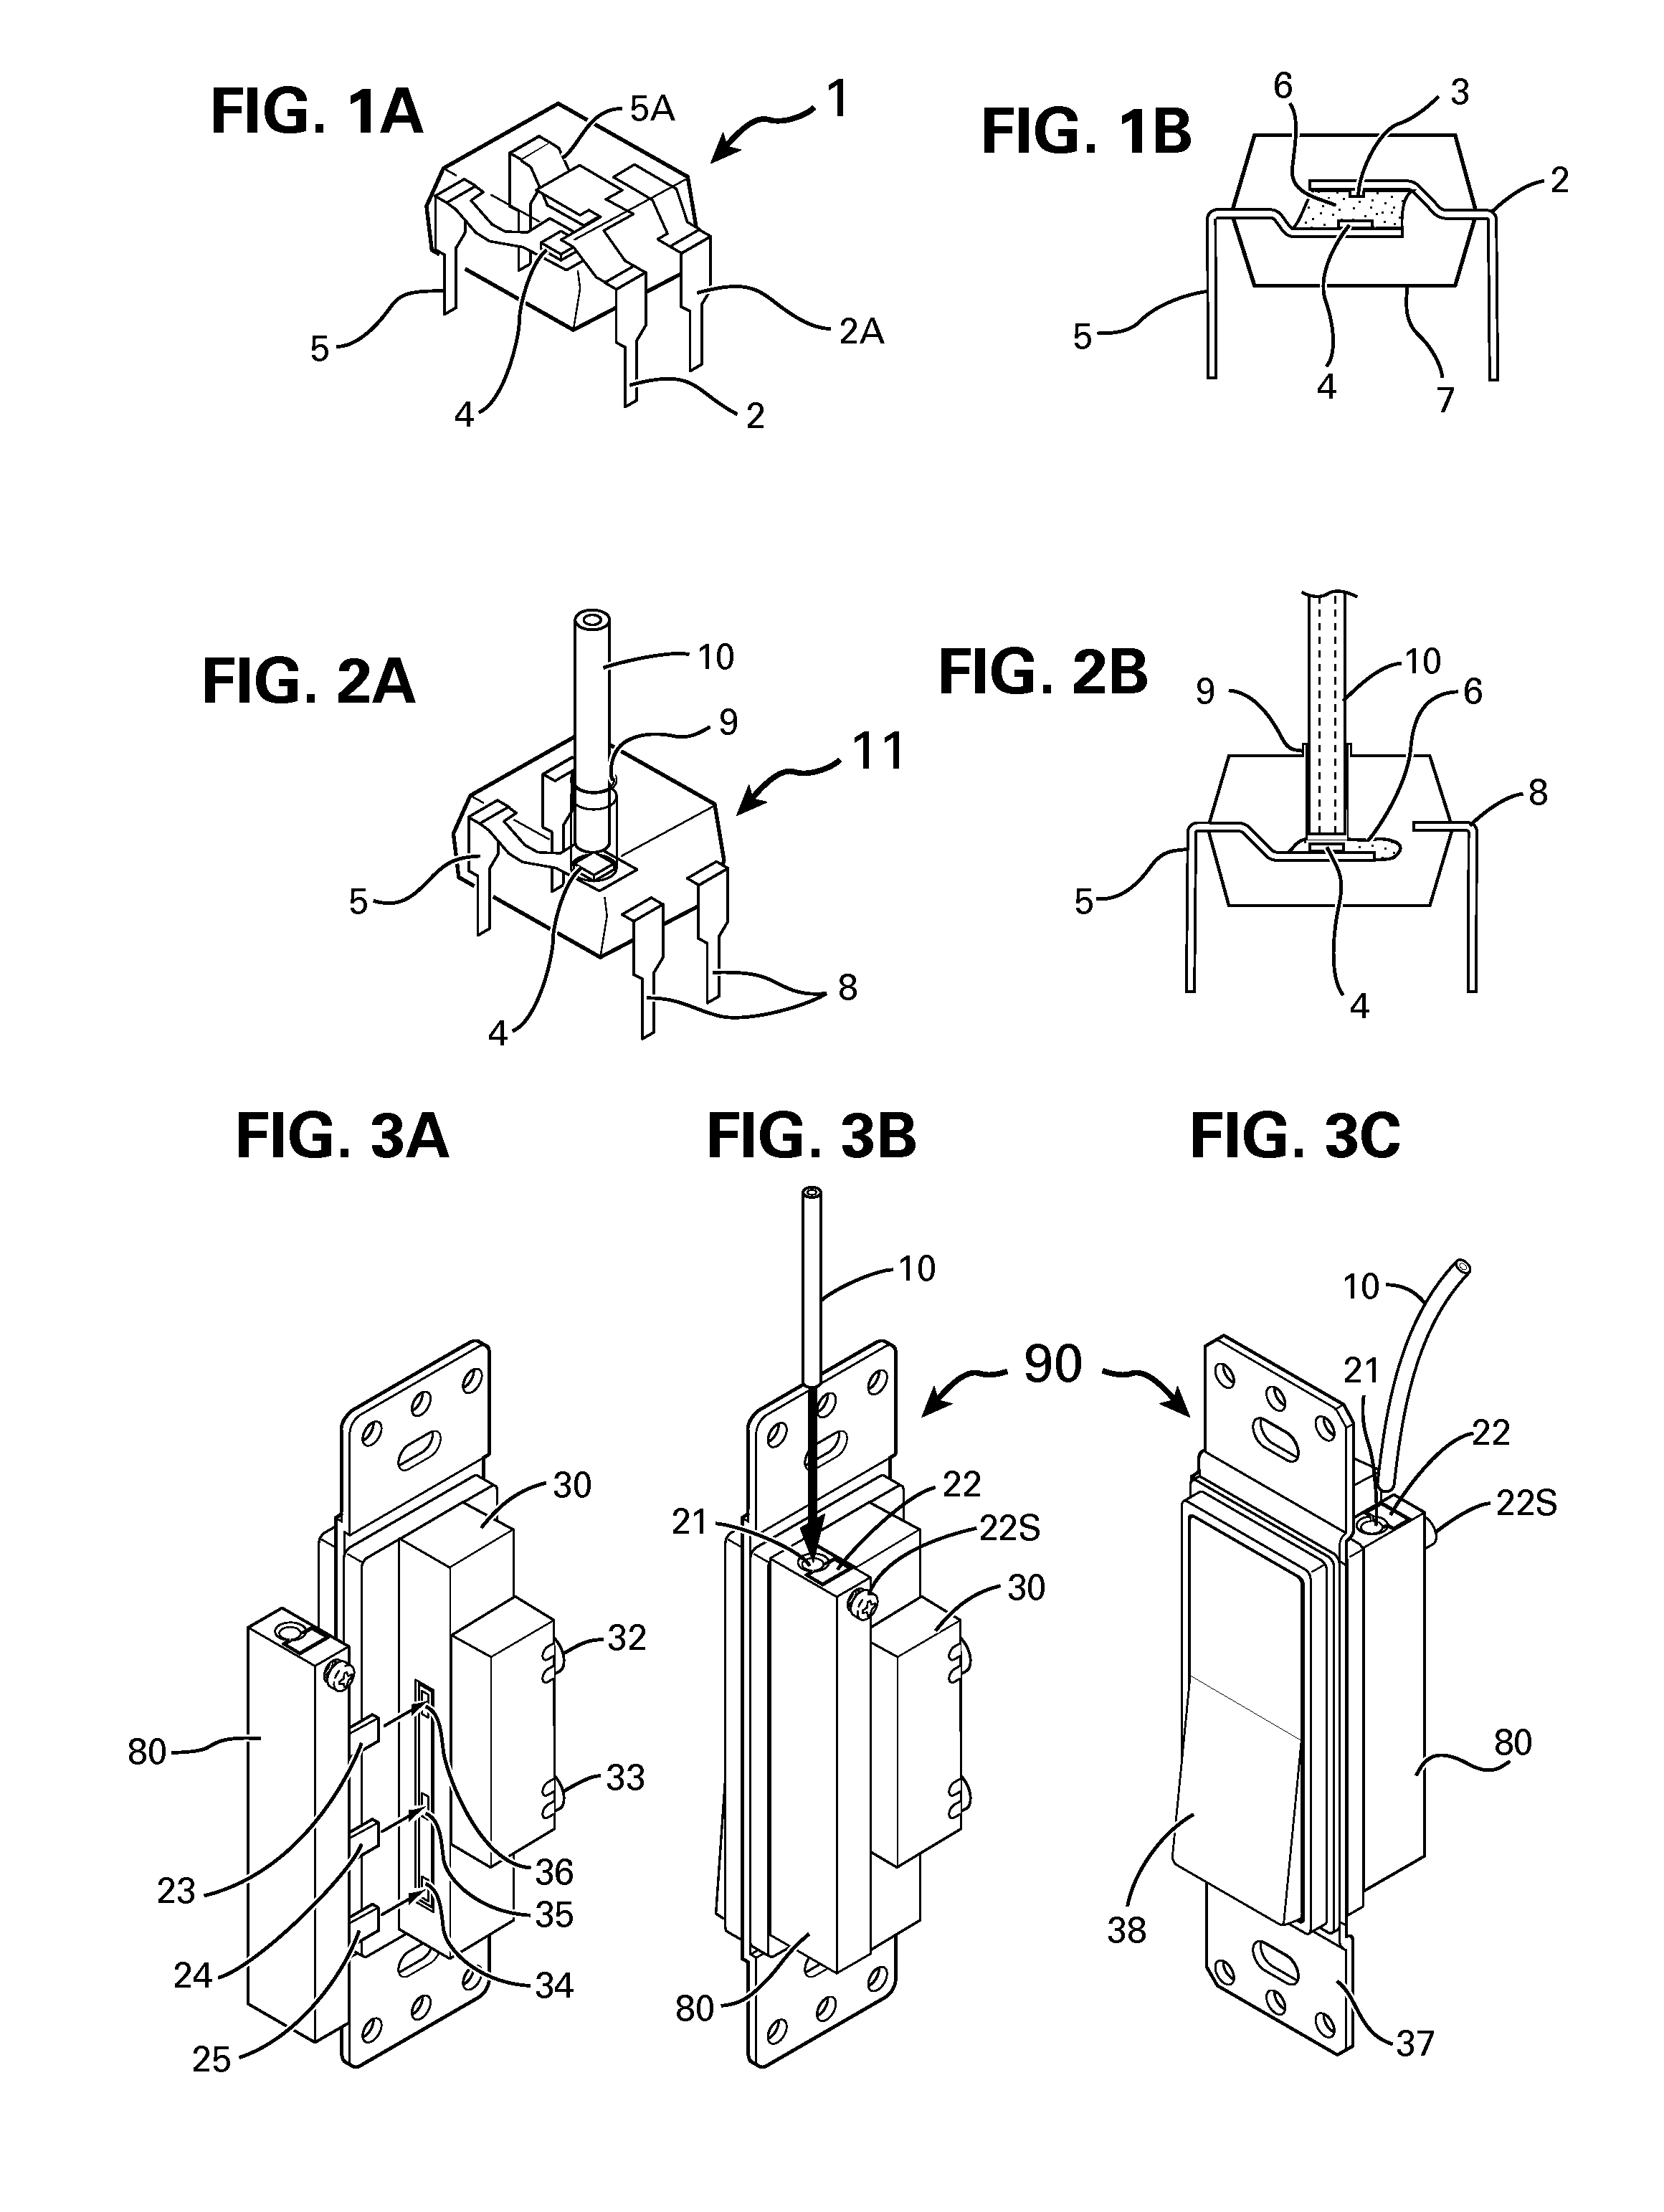 Method and Apparatus for Coupling Optical Signal with Packaged Circuits Via Optical Cables and Lightguide Couplers